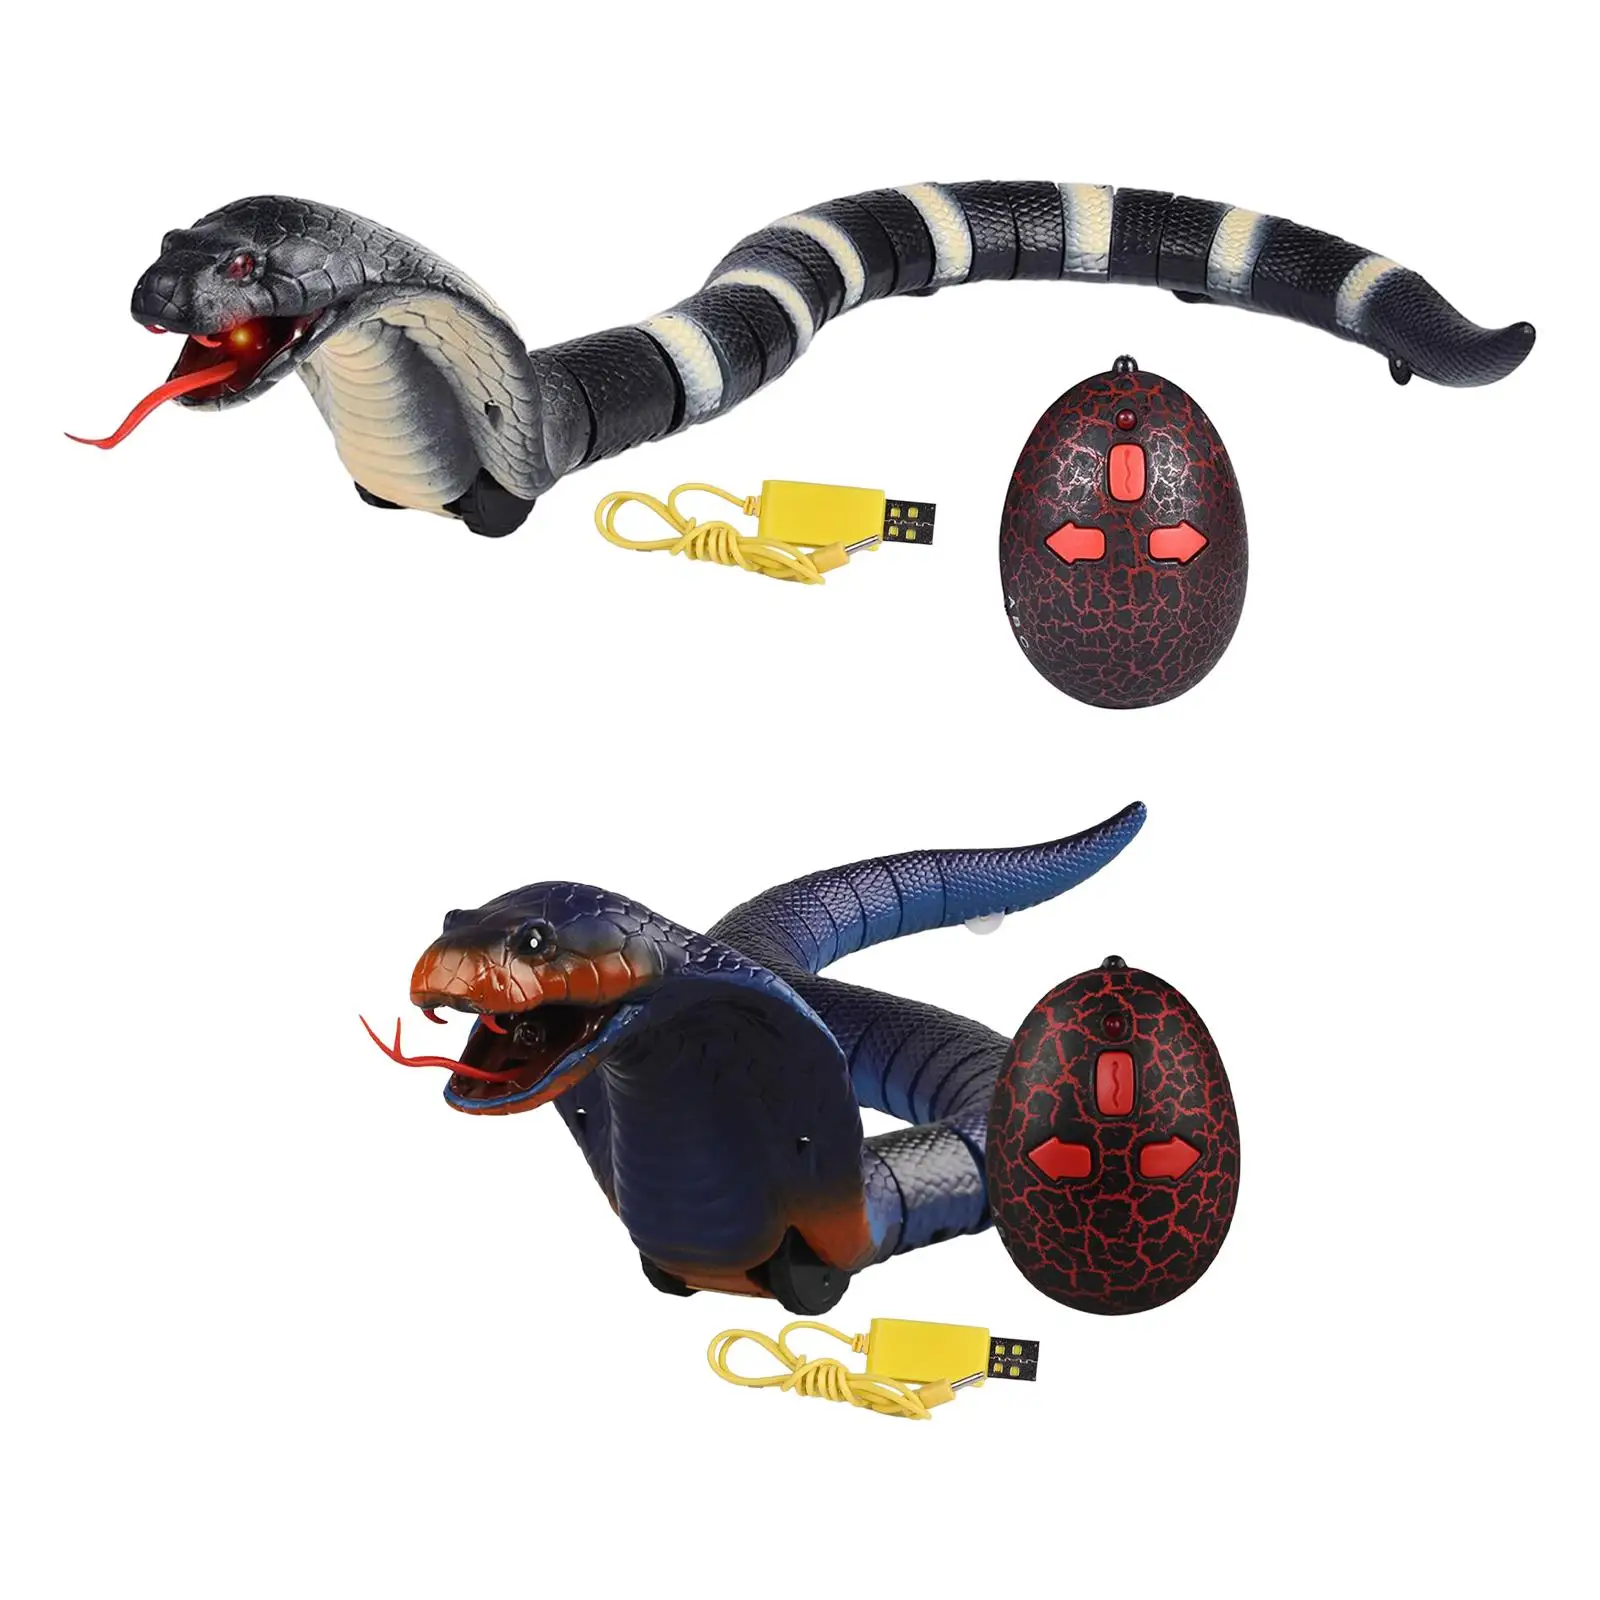 

Rattlesnake Robotic Toy Fast Moving Remote Control Crawlers Infrared Remote Control Snake for Christmas Halloween Birthday Gifts